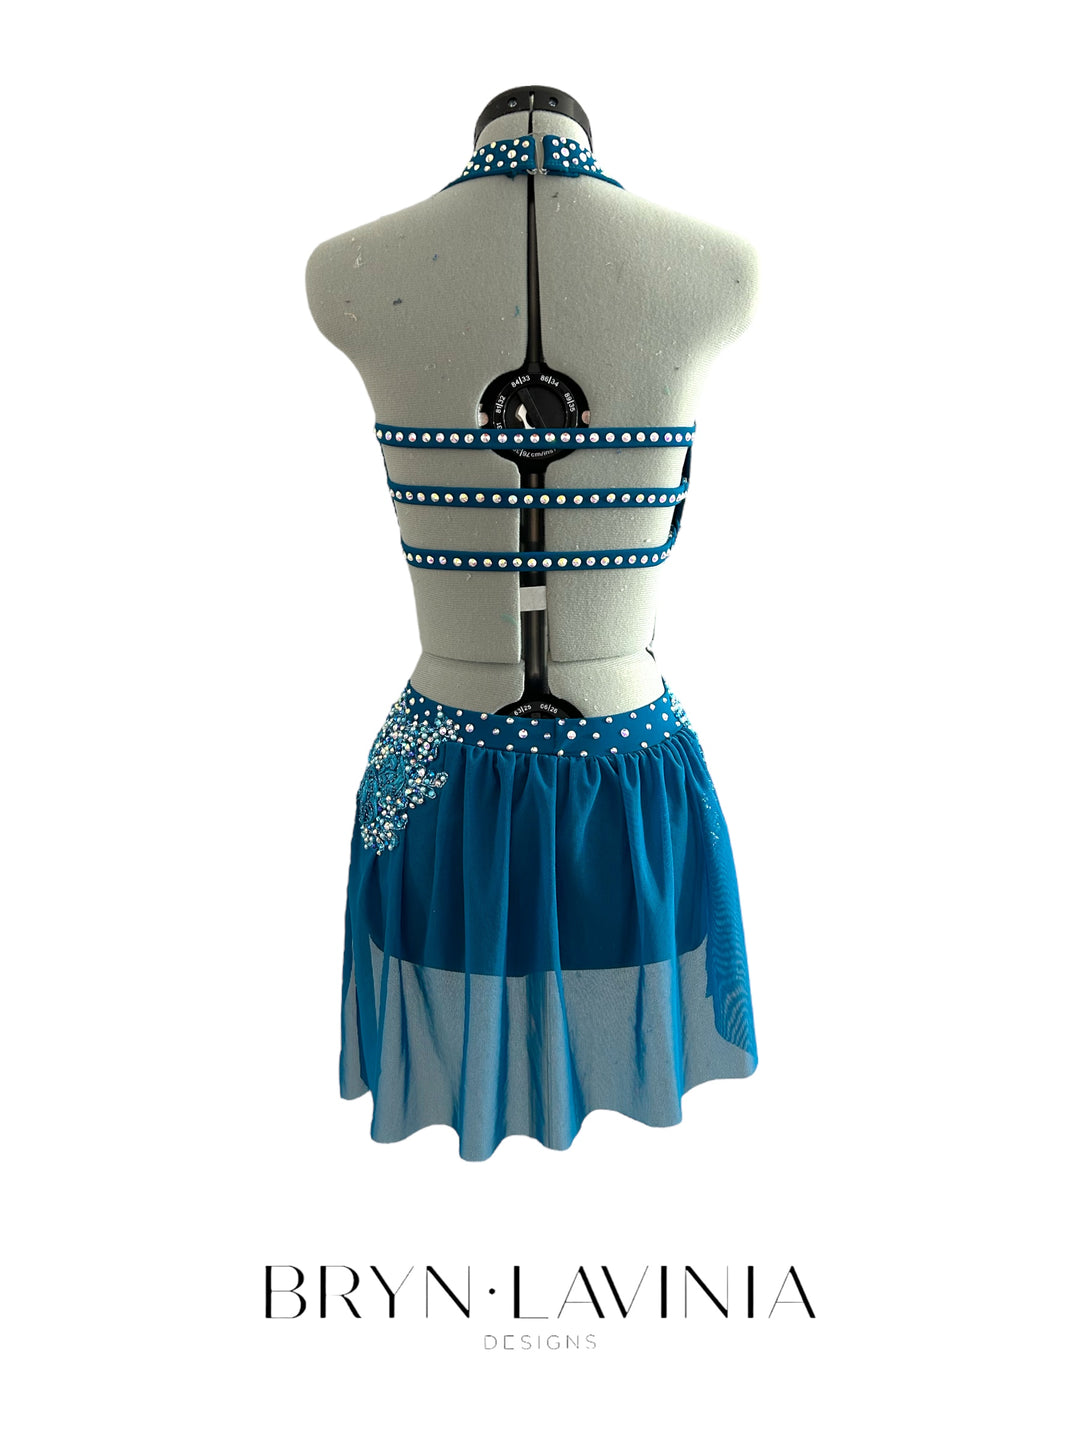 NEW Adult Small dark teal ready to ship costume